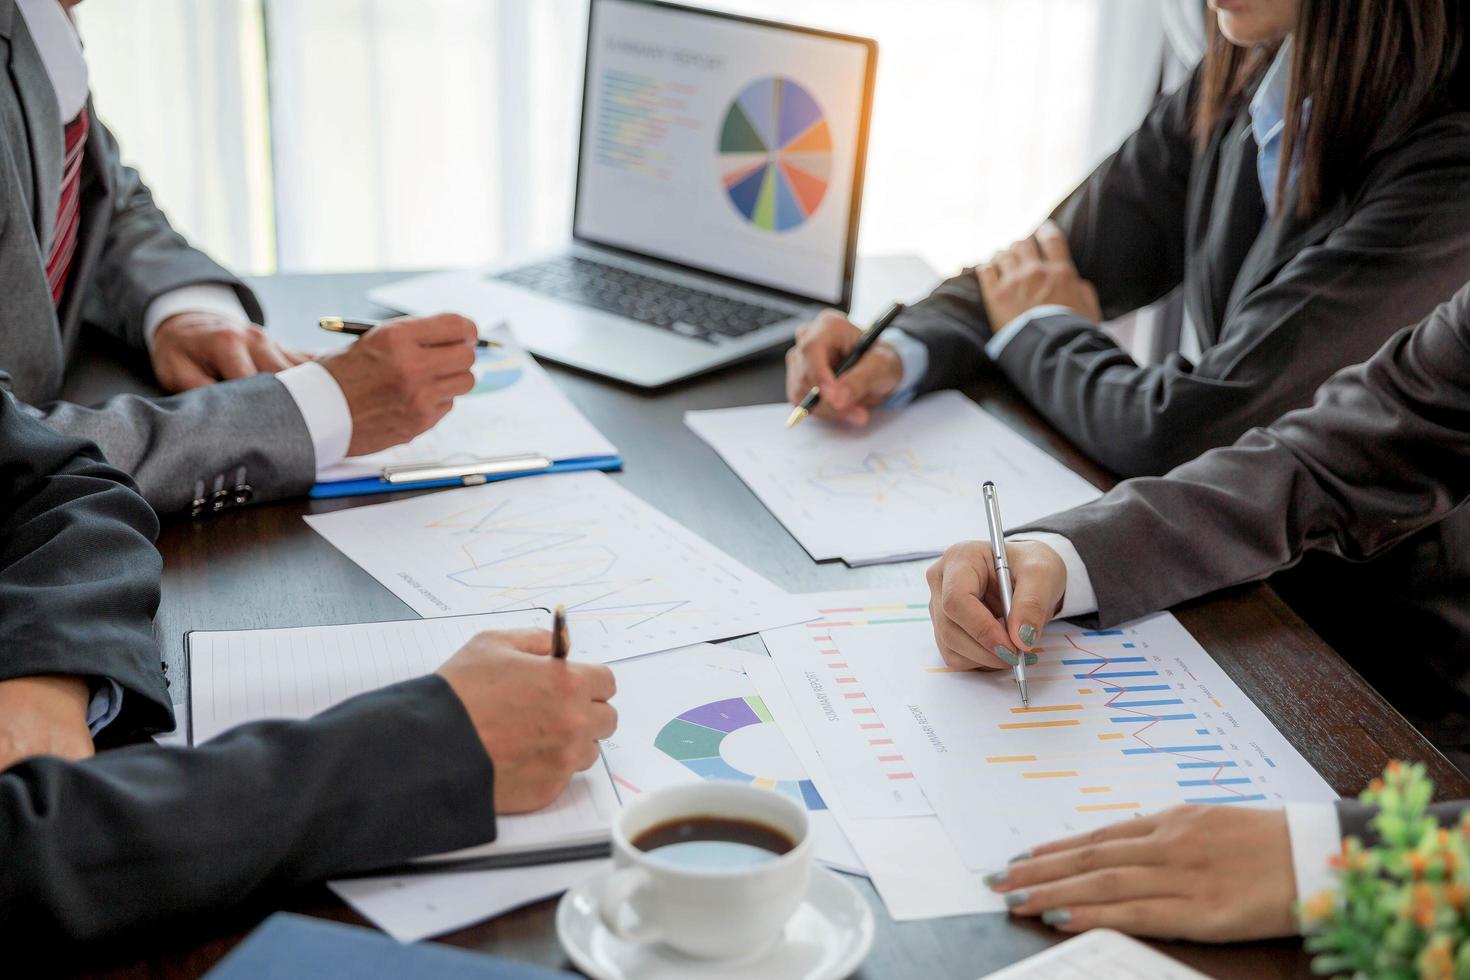 Group professional business people person working together to analyze in office, work together to discuss company financial statistics report, brainstorm ideas, and graph datum documents on the table. photo